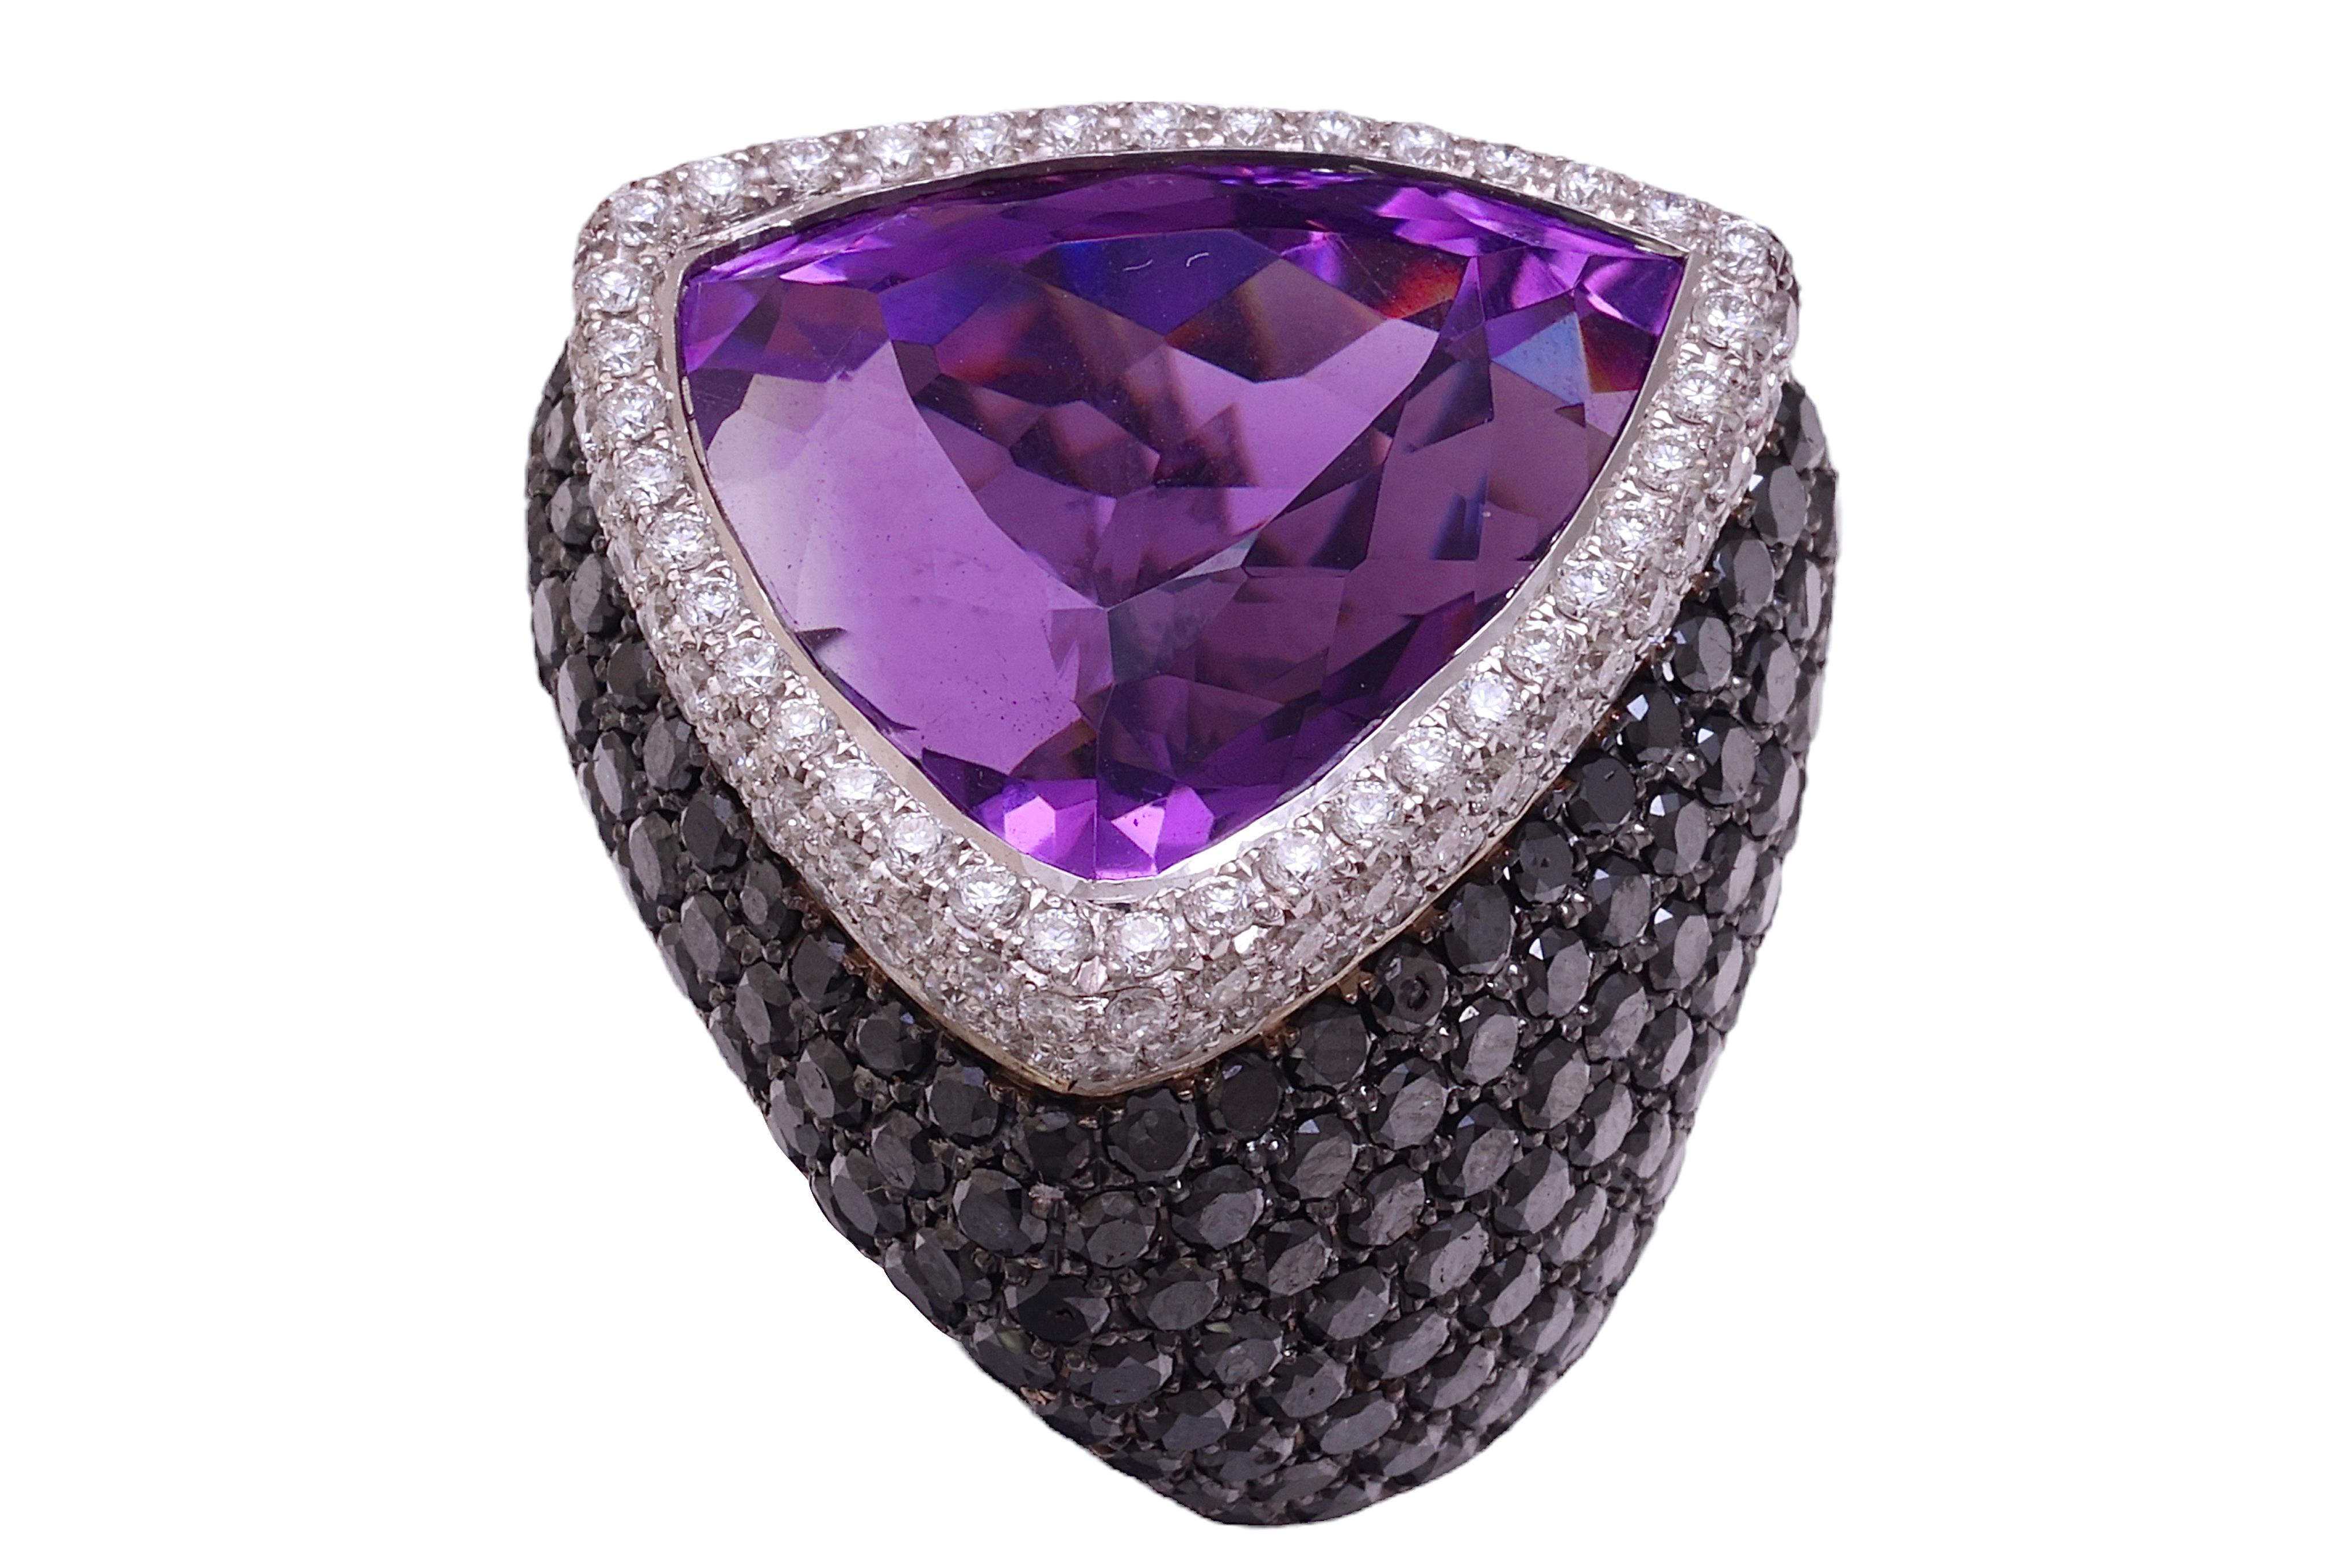 18 kt. White Gold Ring With 27.25 ct. Amethyst, 11.33ct Black & White Diamonds  For Sale 2